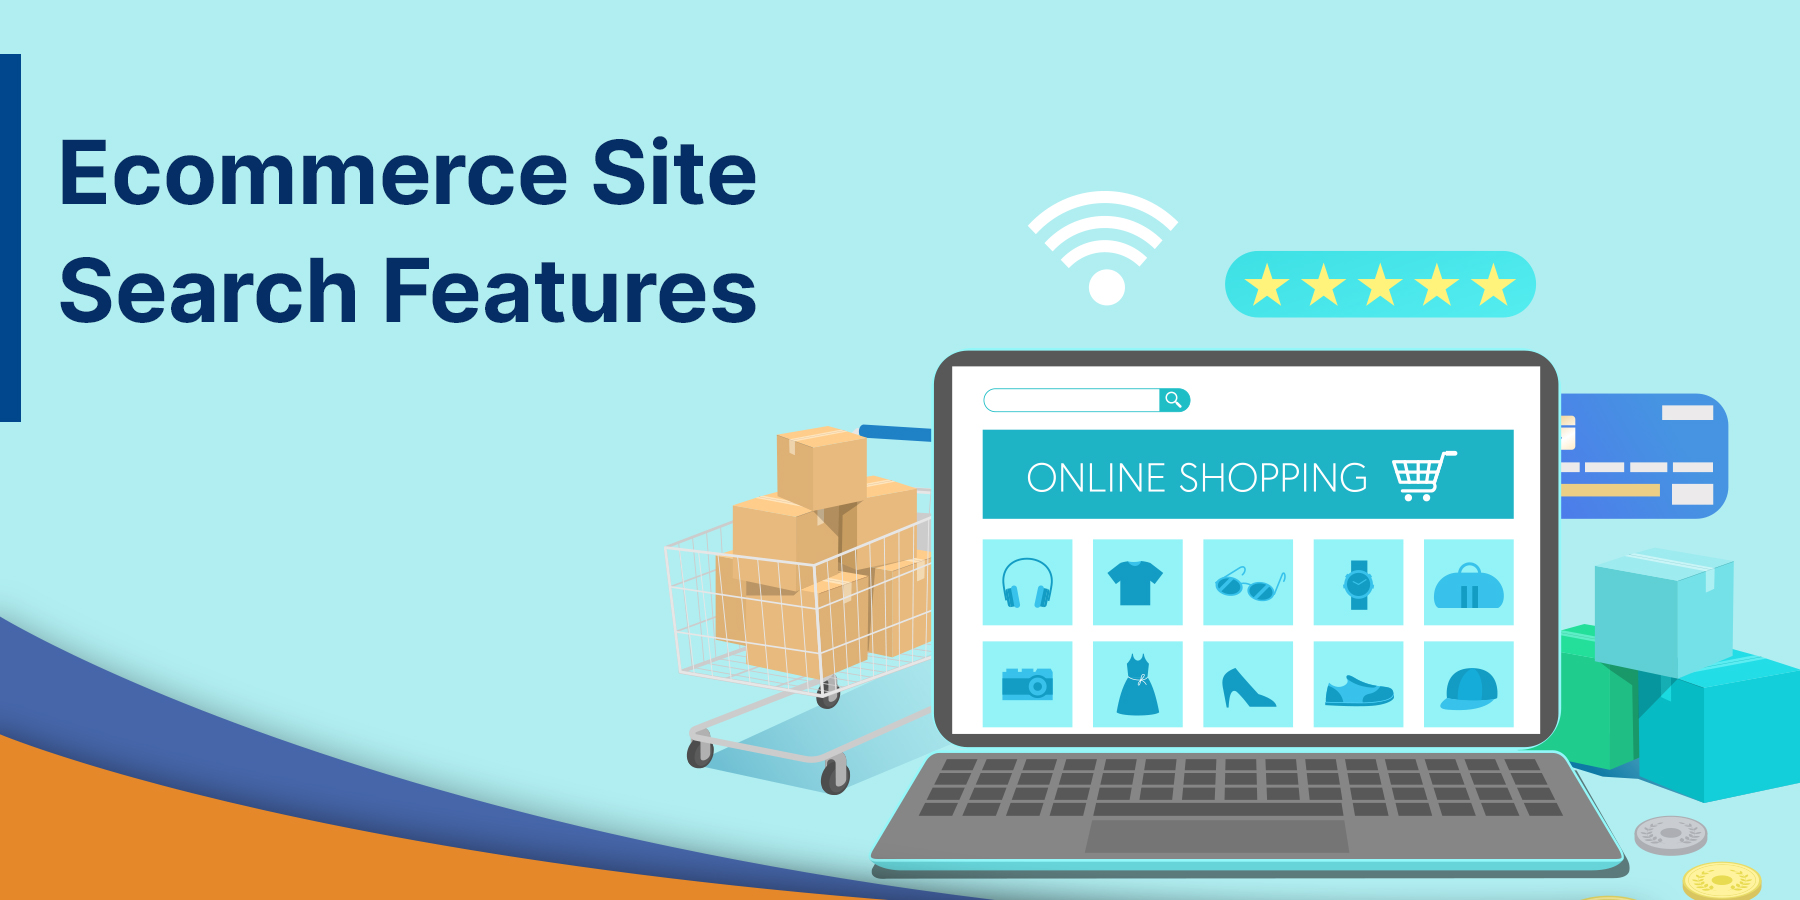 vserve | 6 Trending eCommerce Site Search Features To Know In 2021